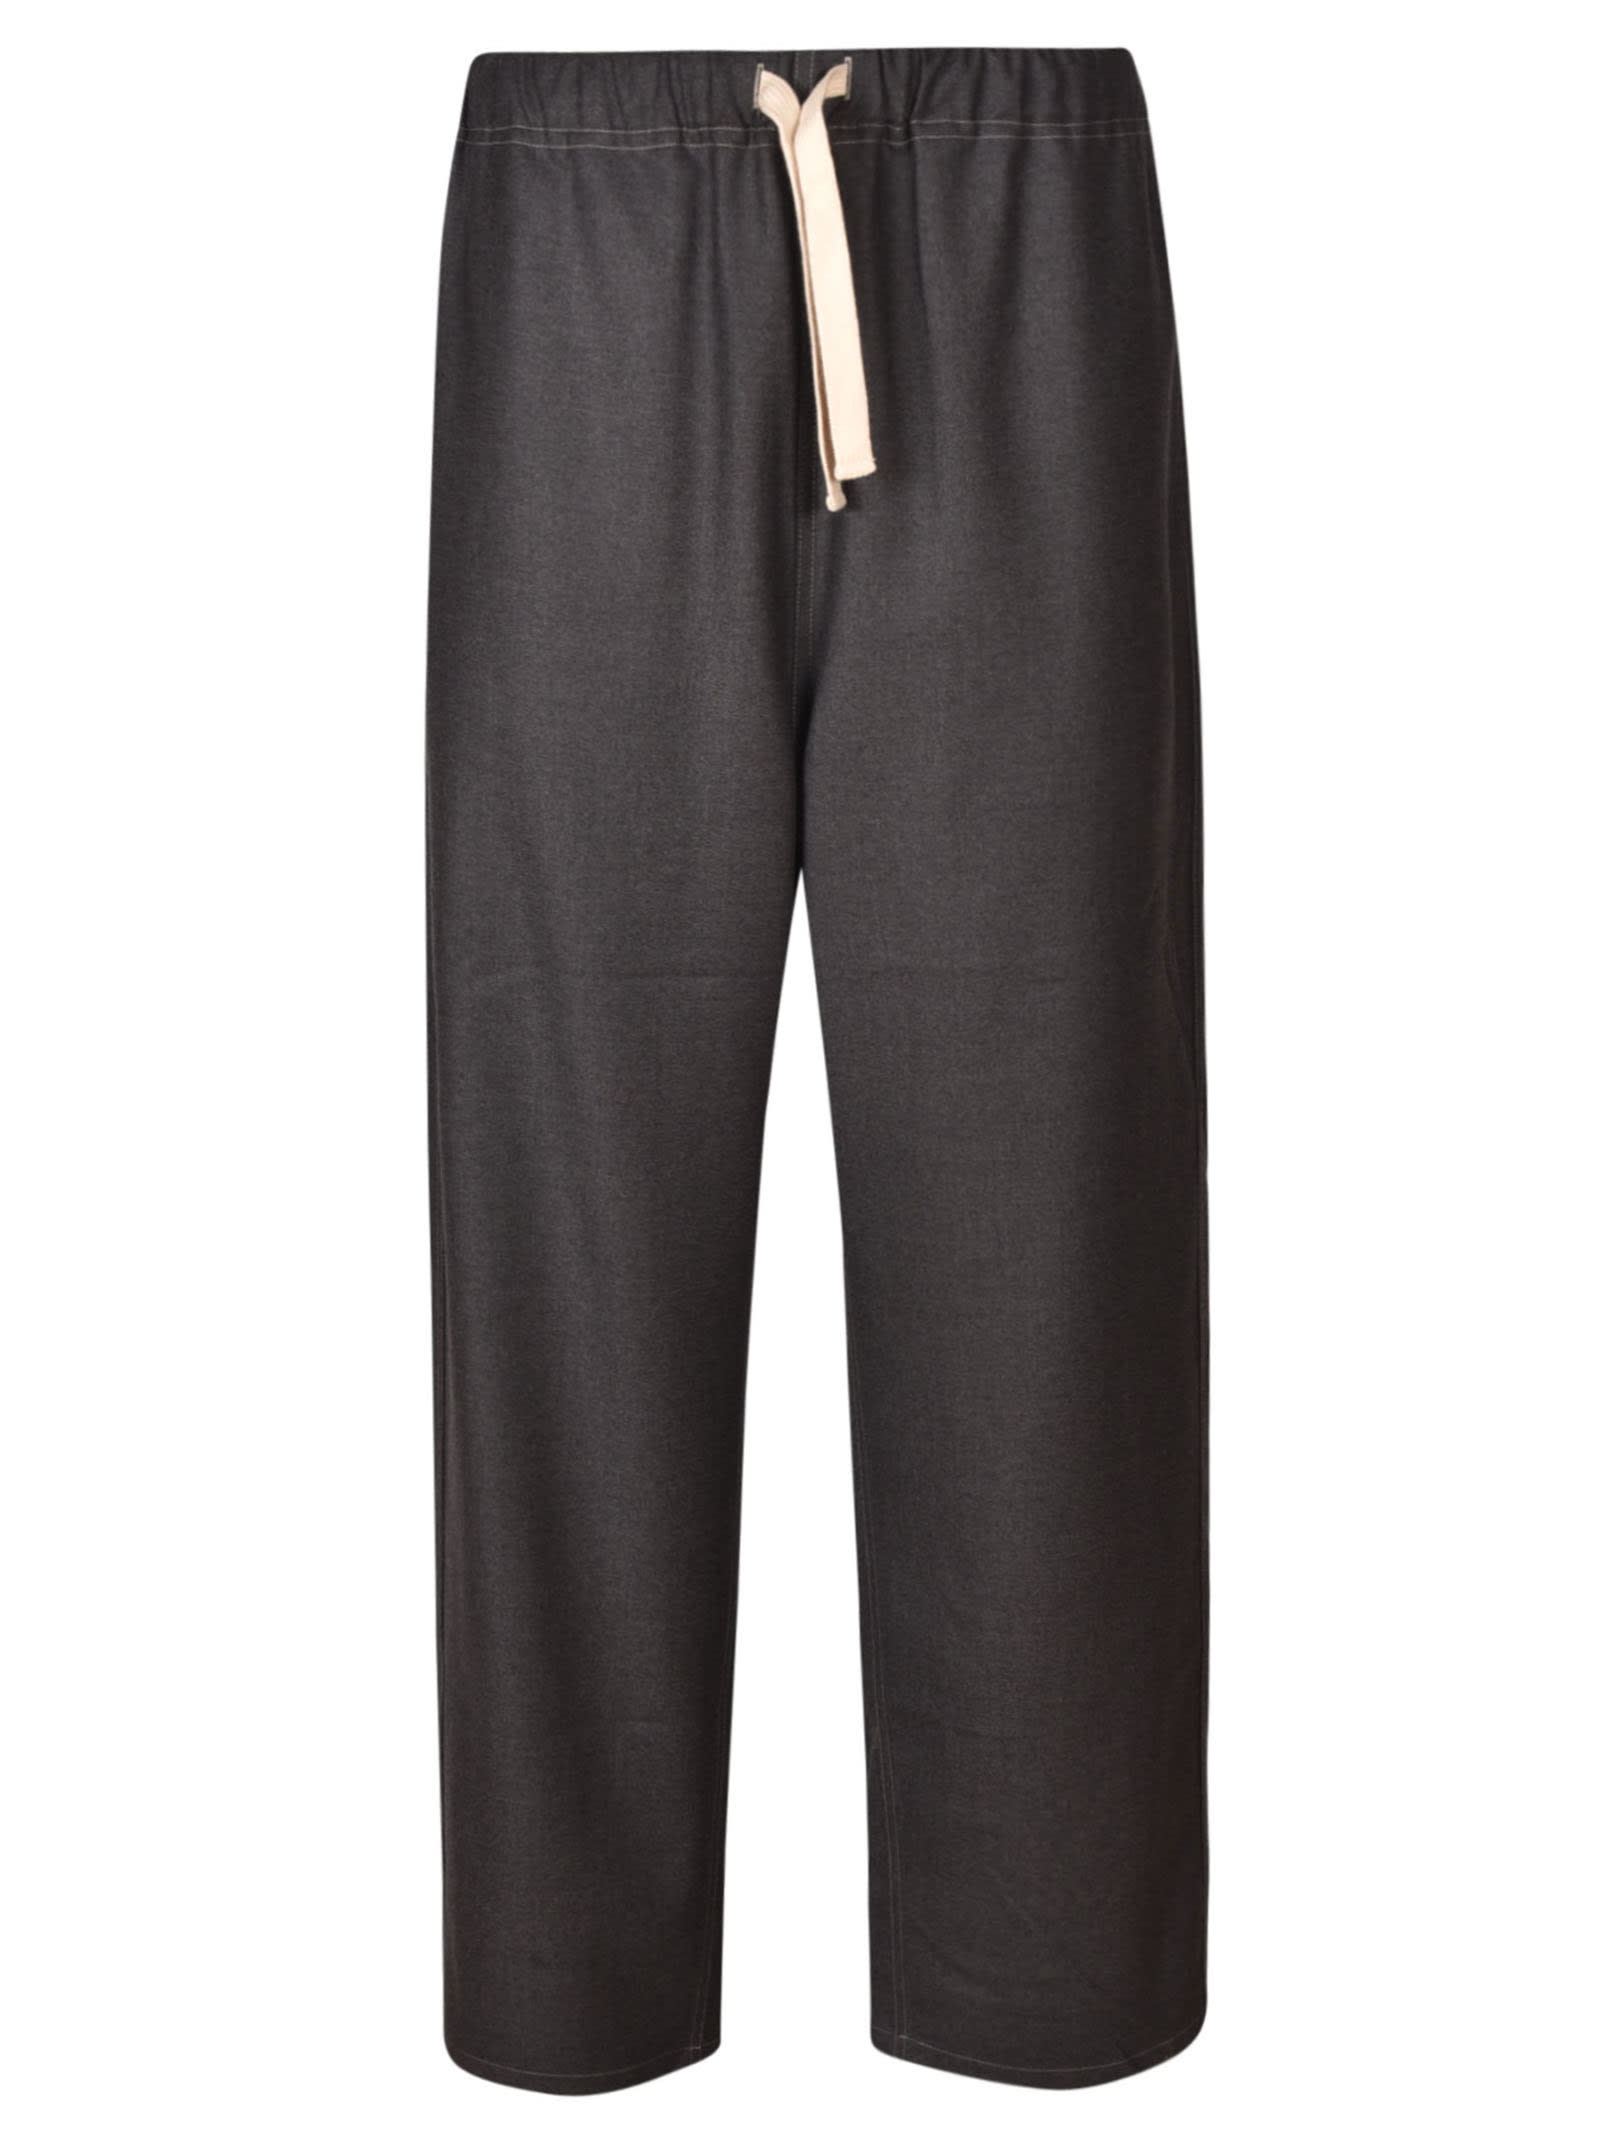 Sofie dHoore Drawstring Waist Wide Leg Trousers